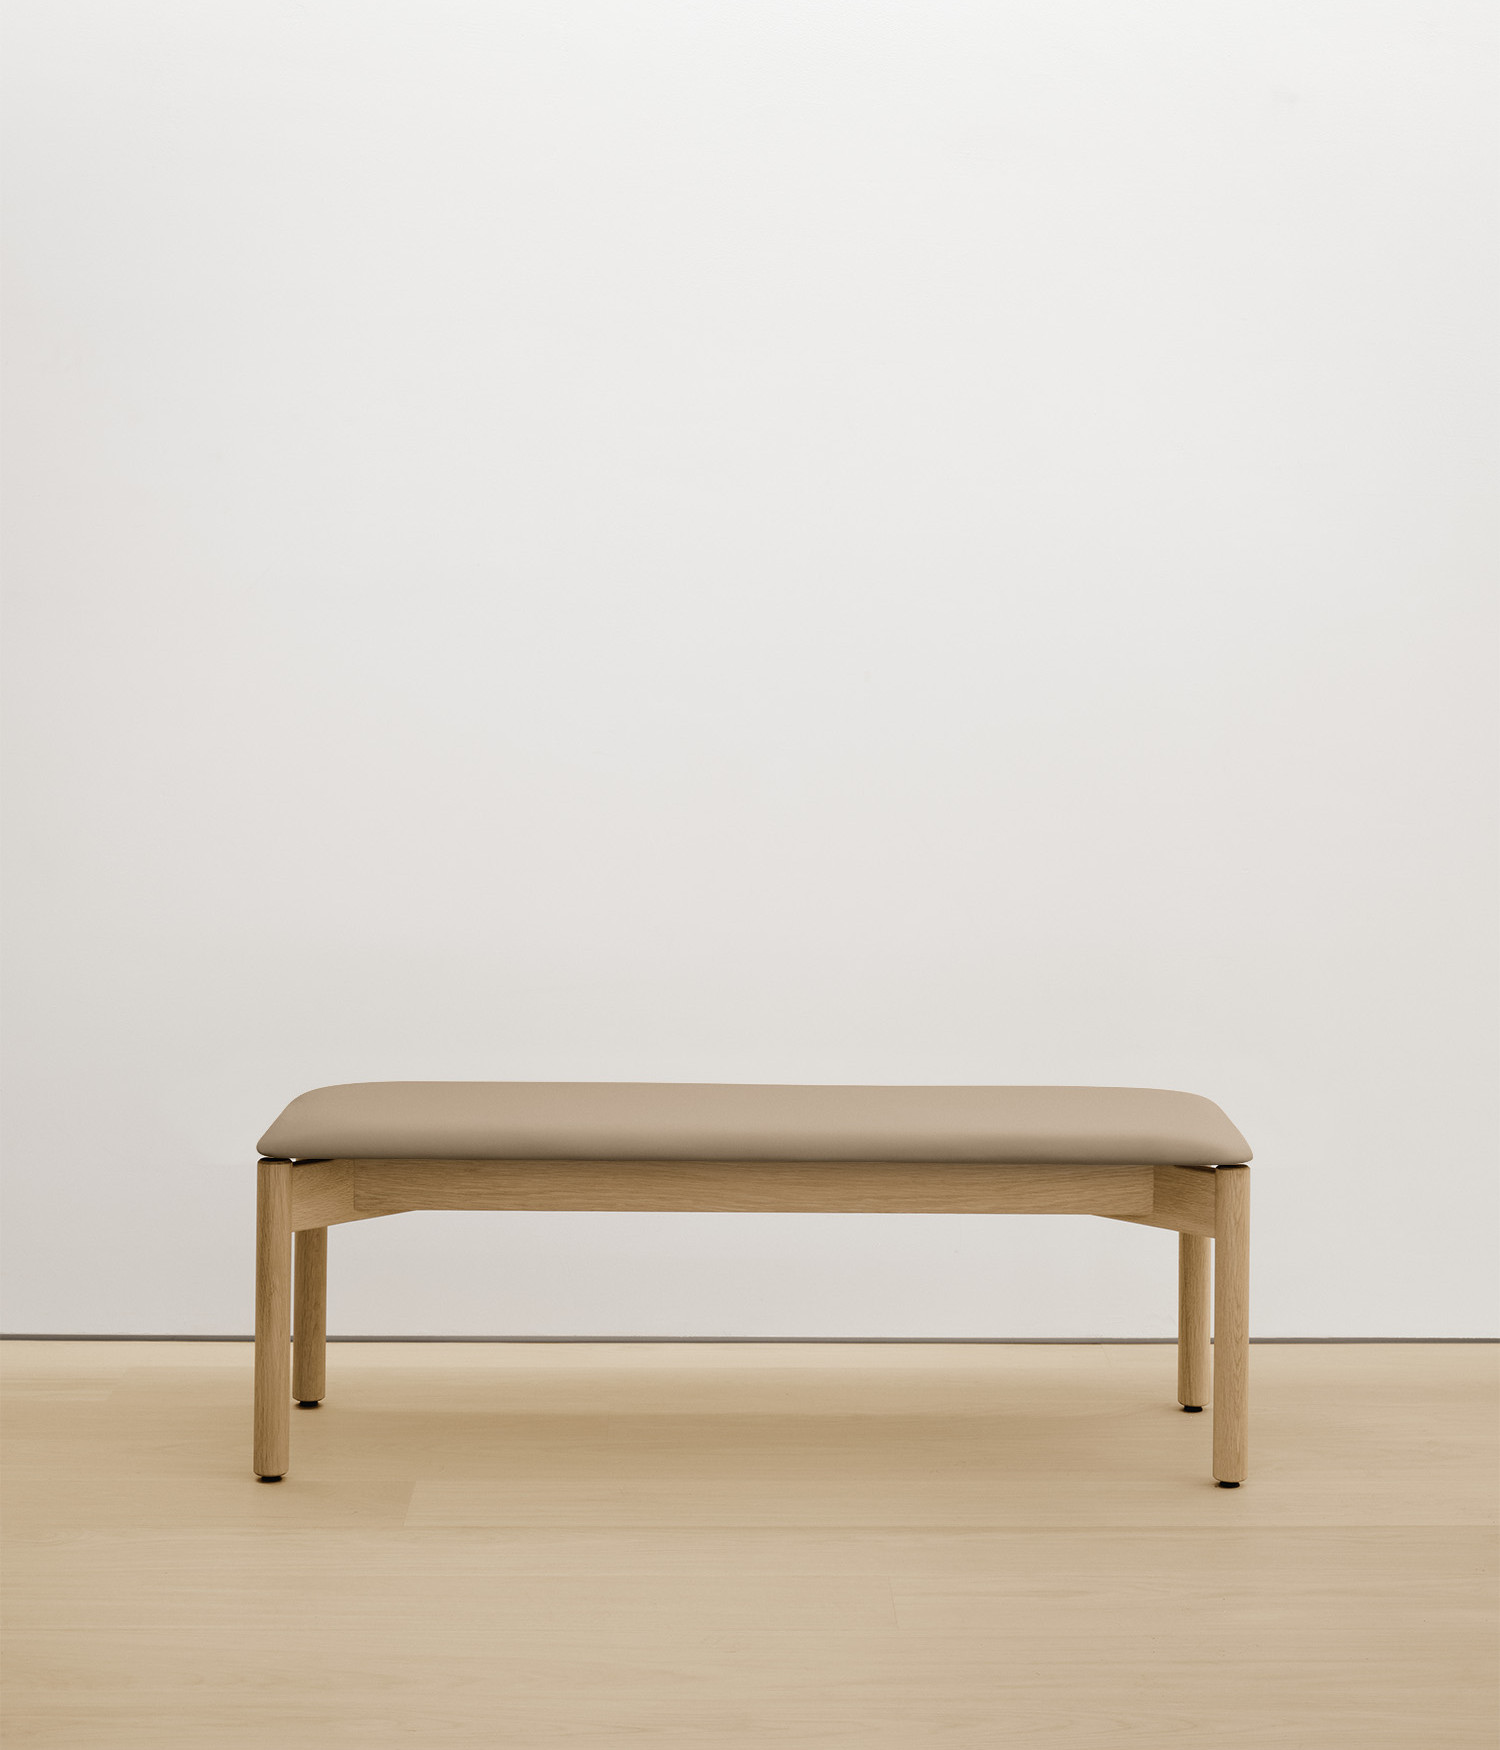 white-oak bench with cream upholstered seat